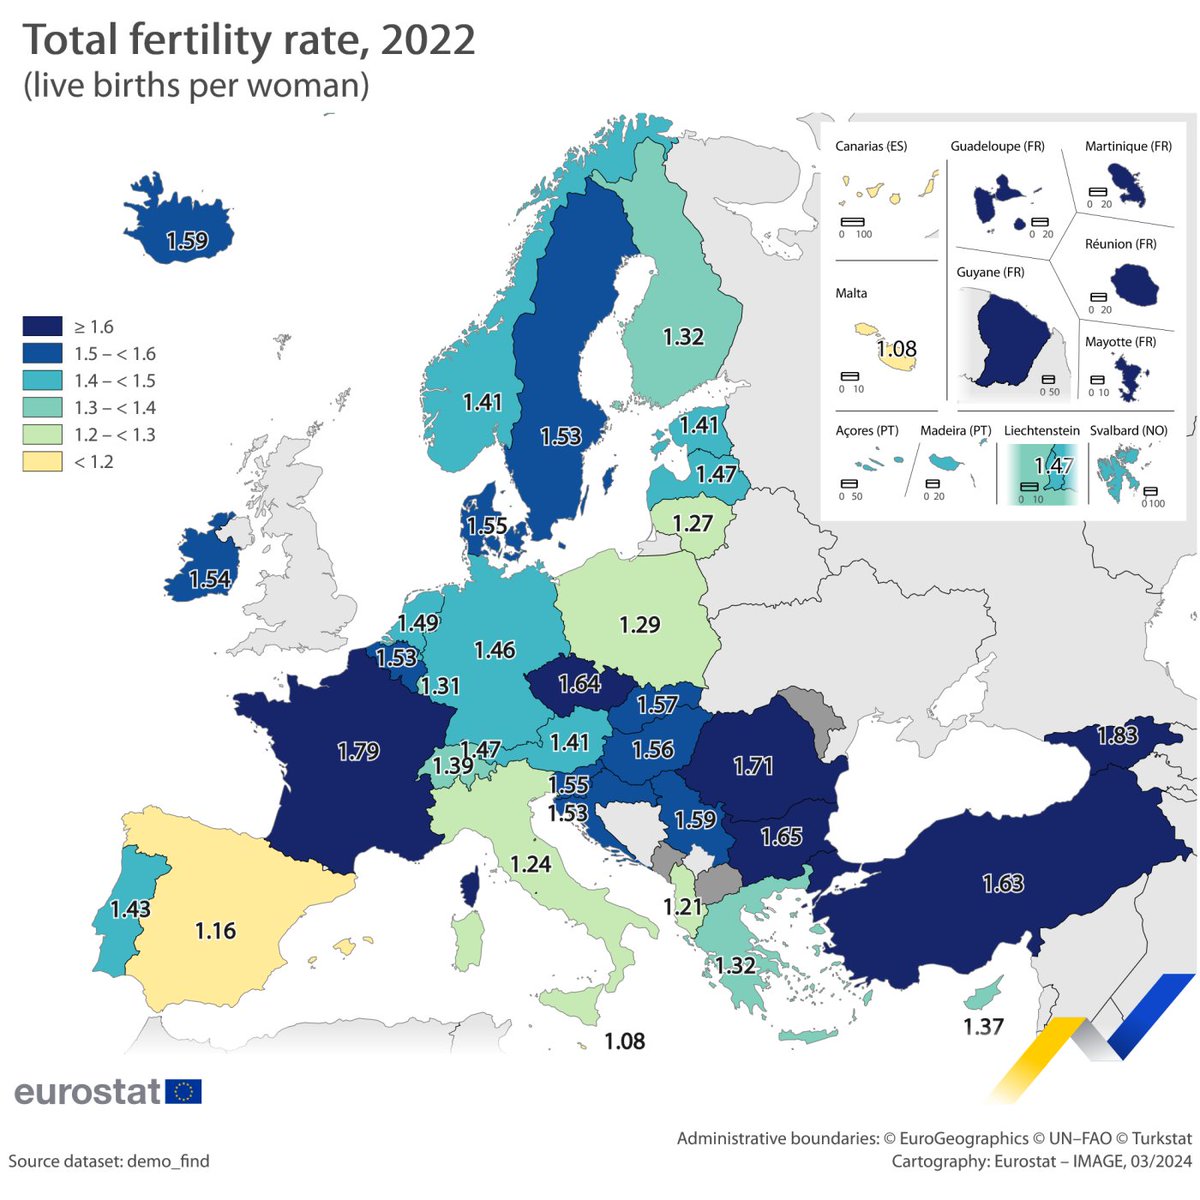 Interesting fact: Czechia (one of the least religious countries in the world) has a higher fertility rate than Turkey.